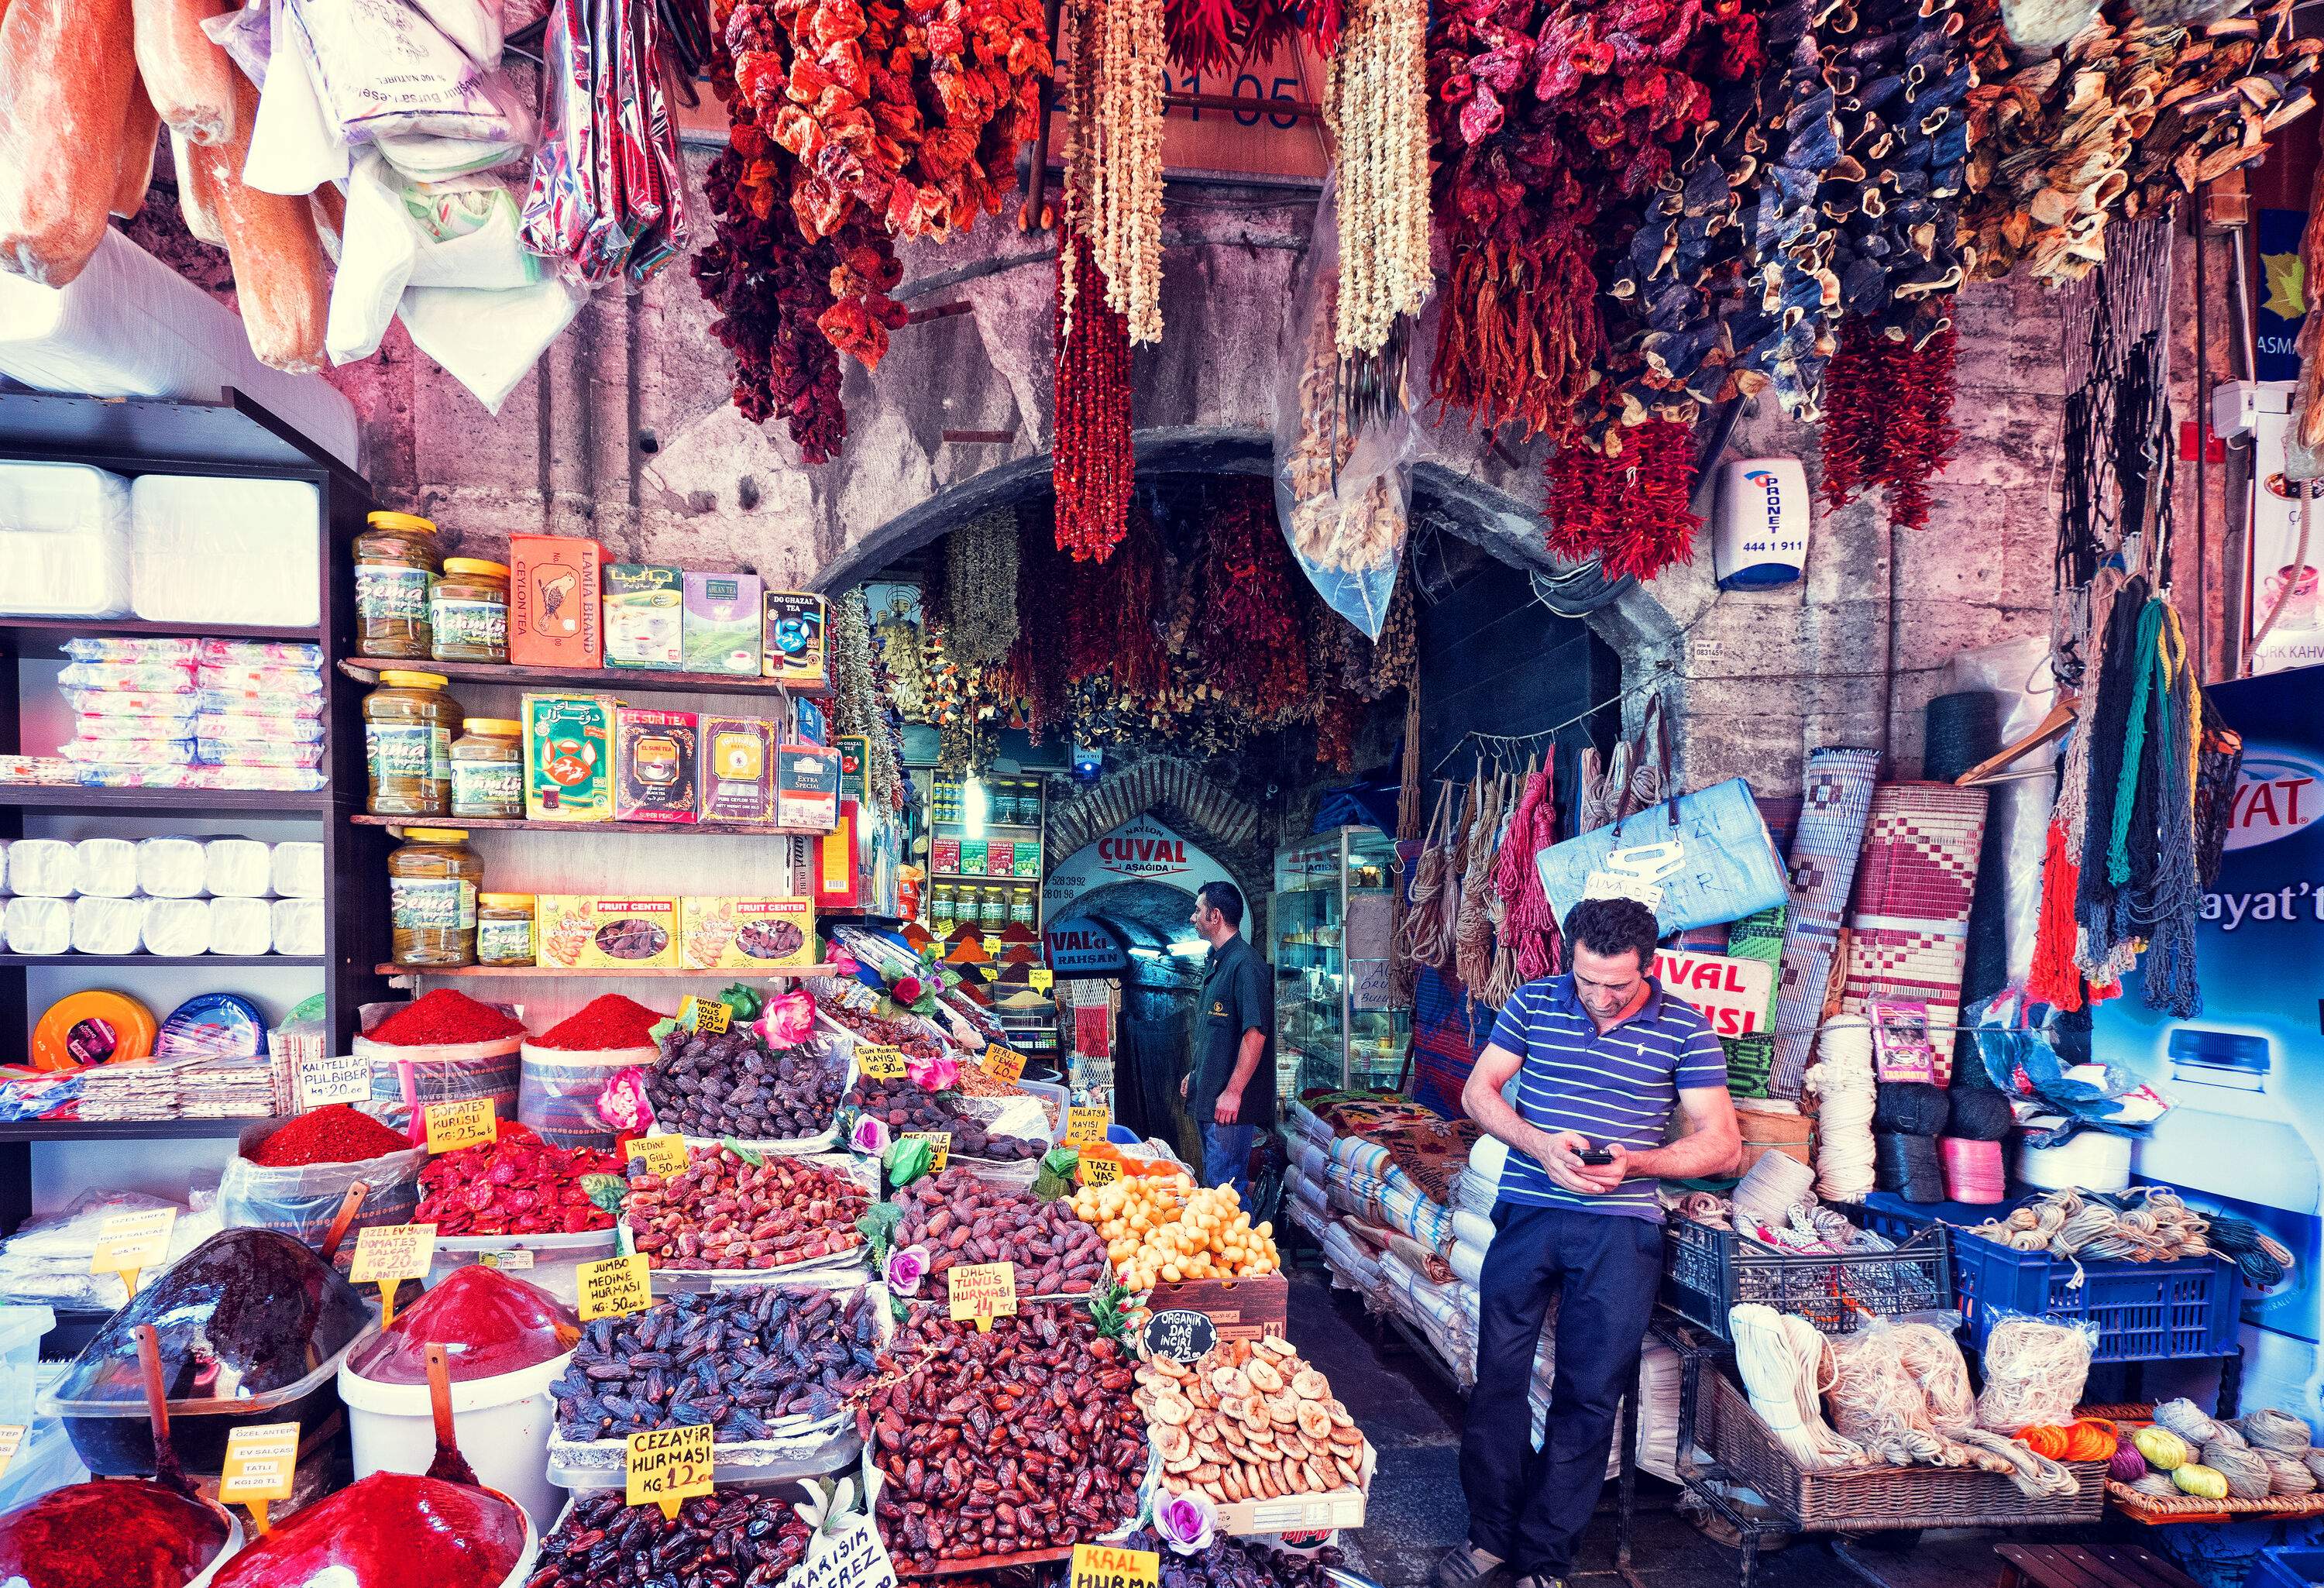 A man stands at the entrance of a bazaar with a display of assorted spices, carpets, and souvenir items.